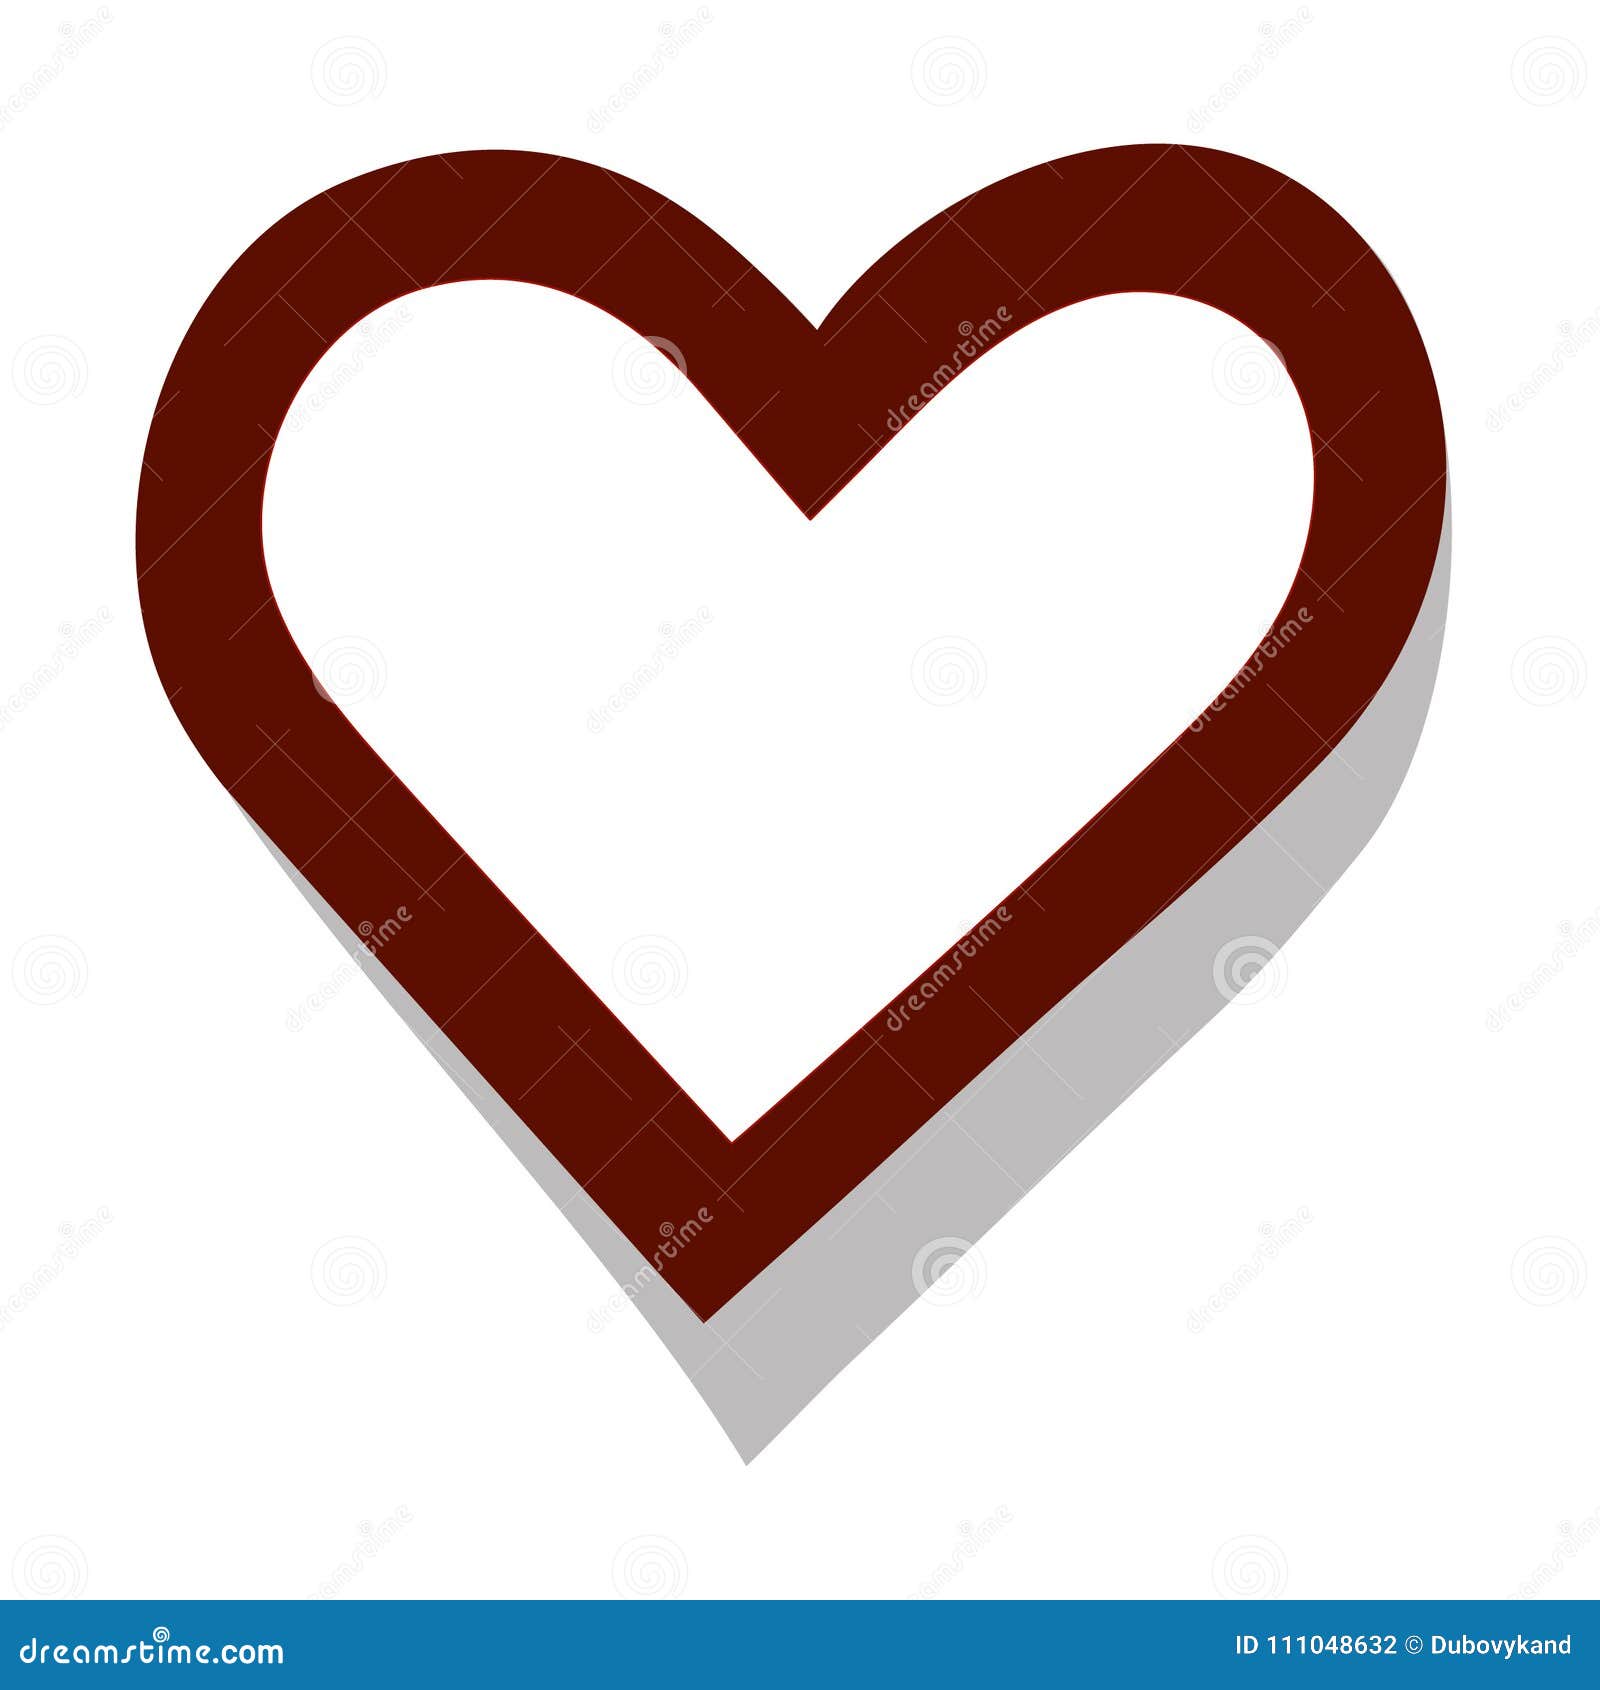 72,981 Red Heart Outline Images, Stock Photos, 3D objects, & Vectors